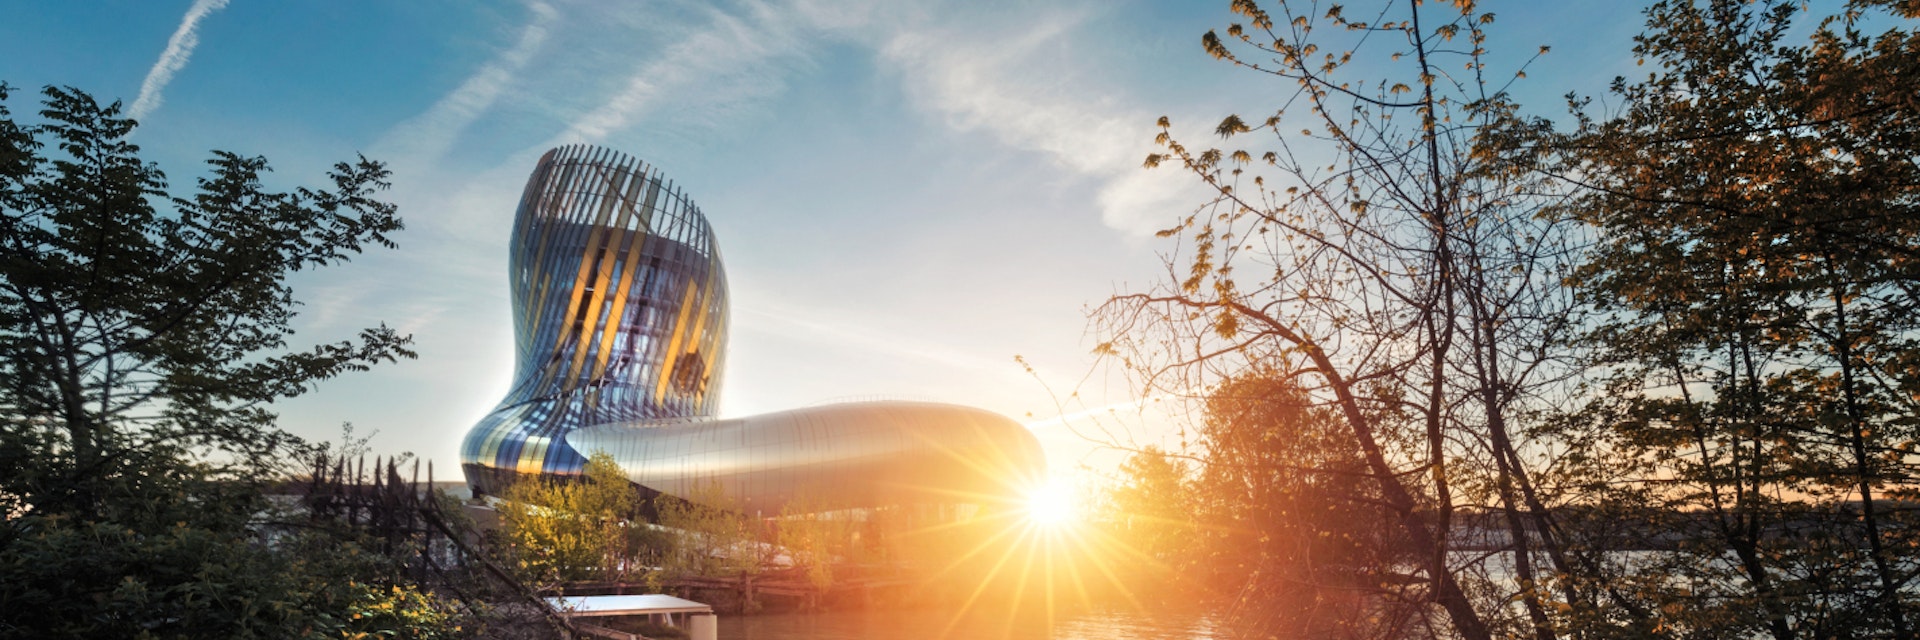 New museum of wine in Bordeaux City